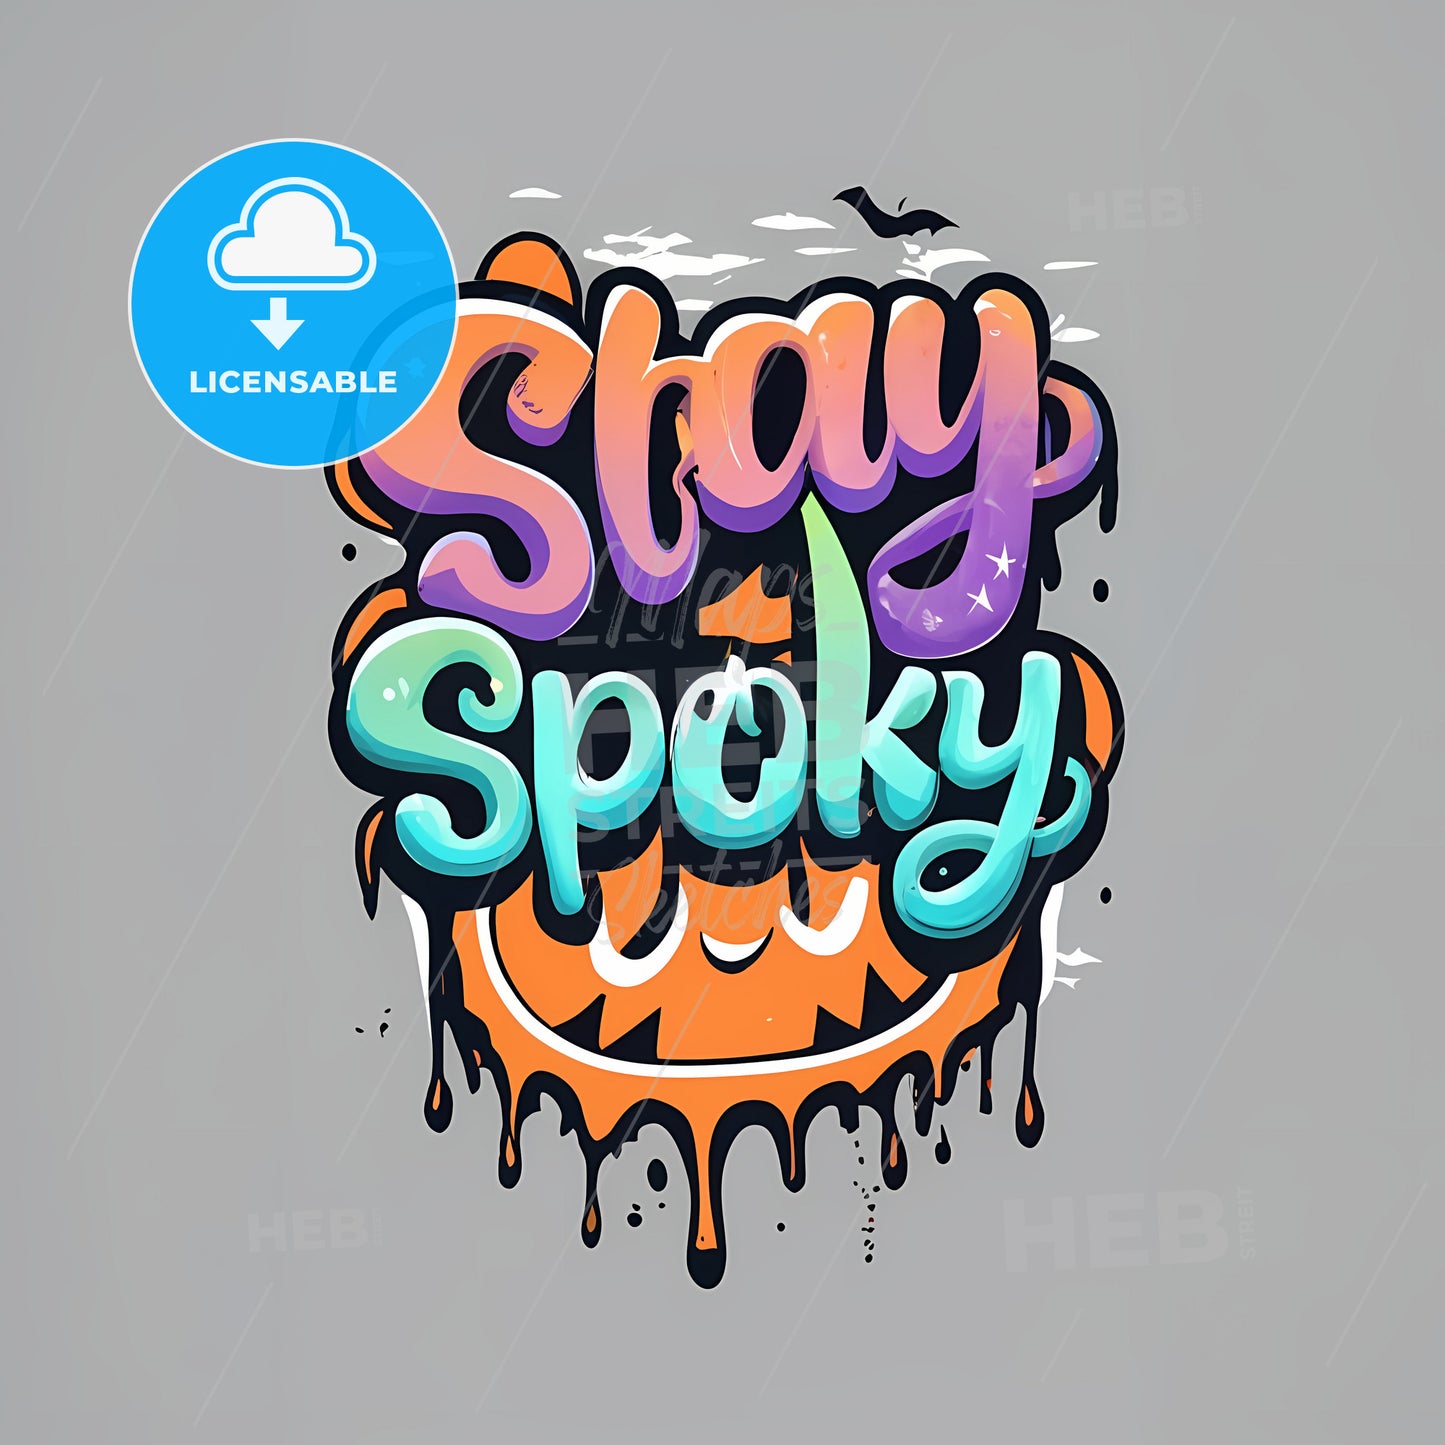 Stay Spooky - A Logo With A Smiley Face And Text